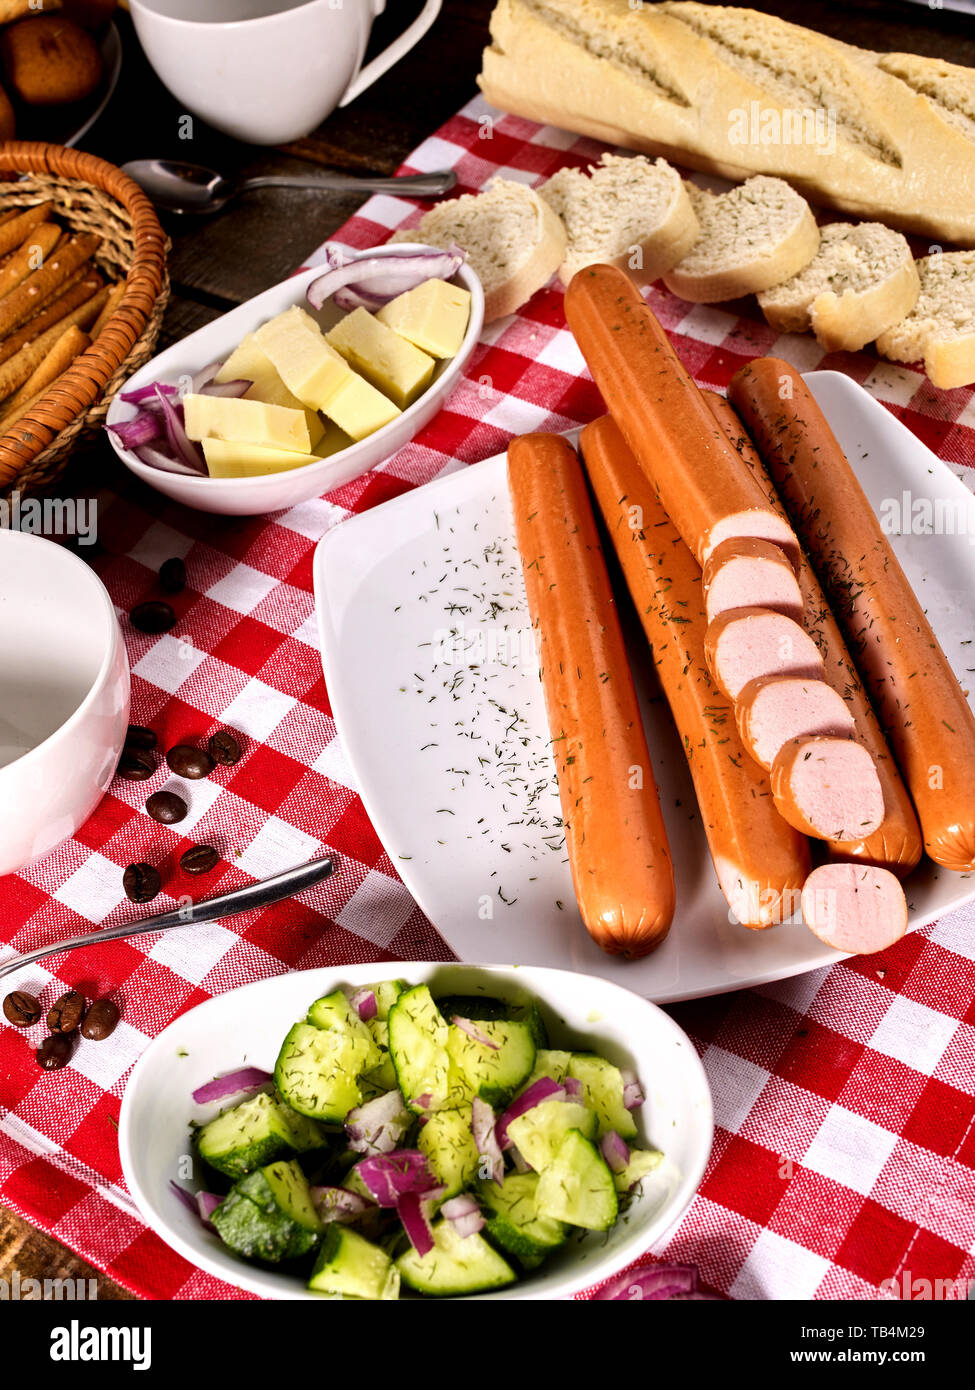 Sausage portion with baguette on table setting on checkered cloth Stock Photo